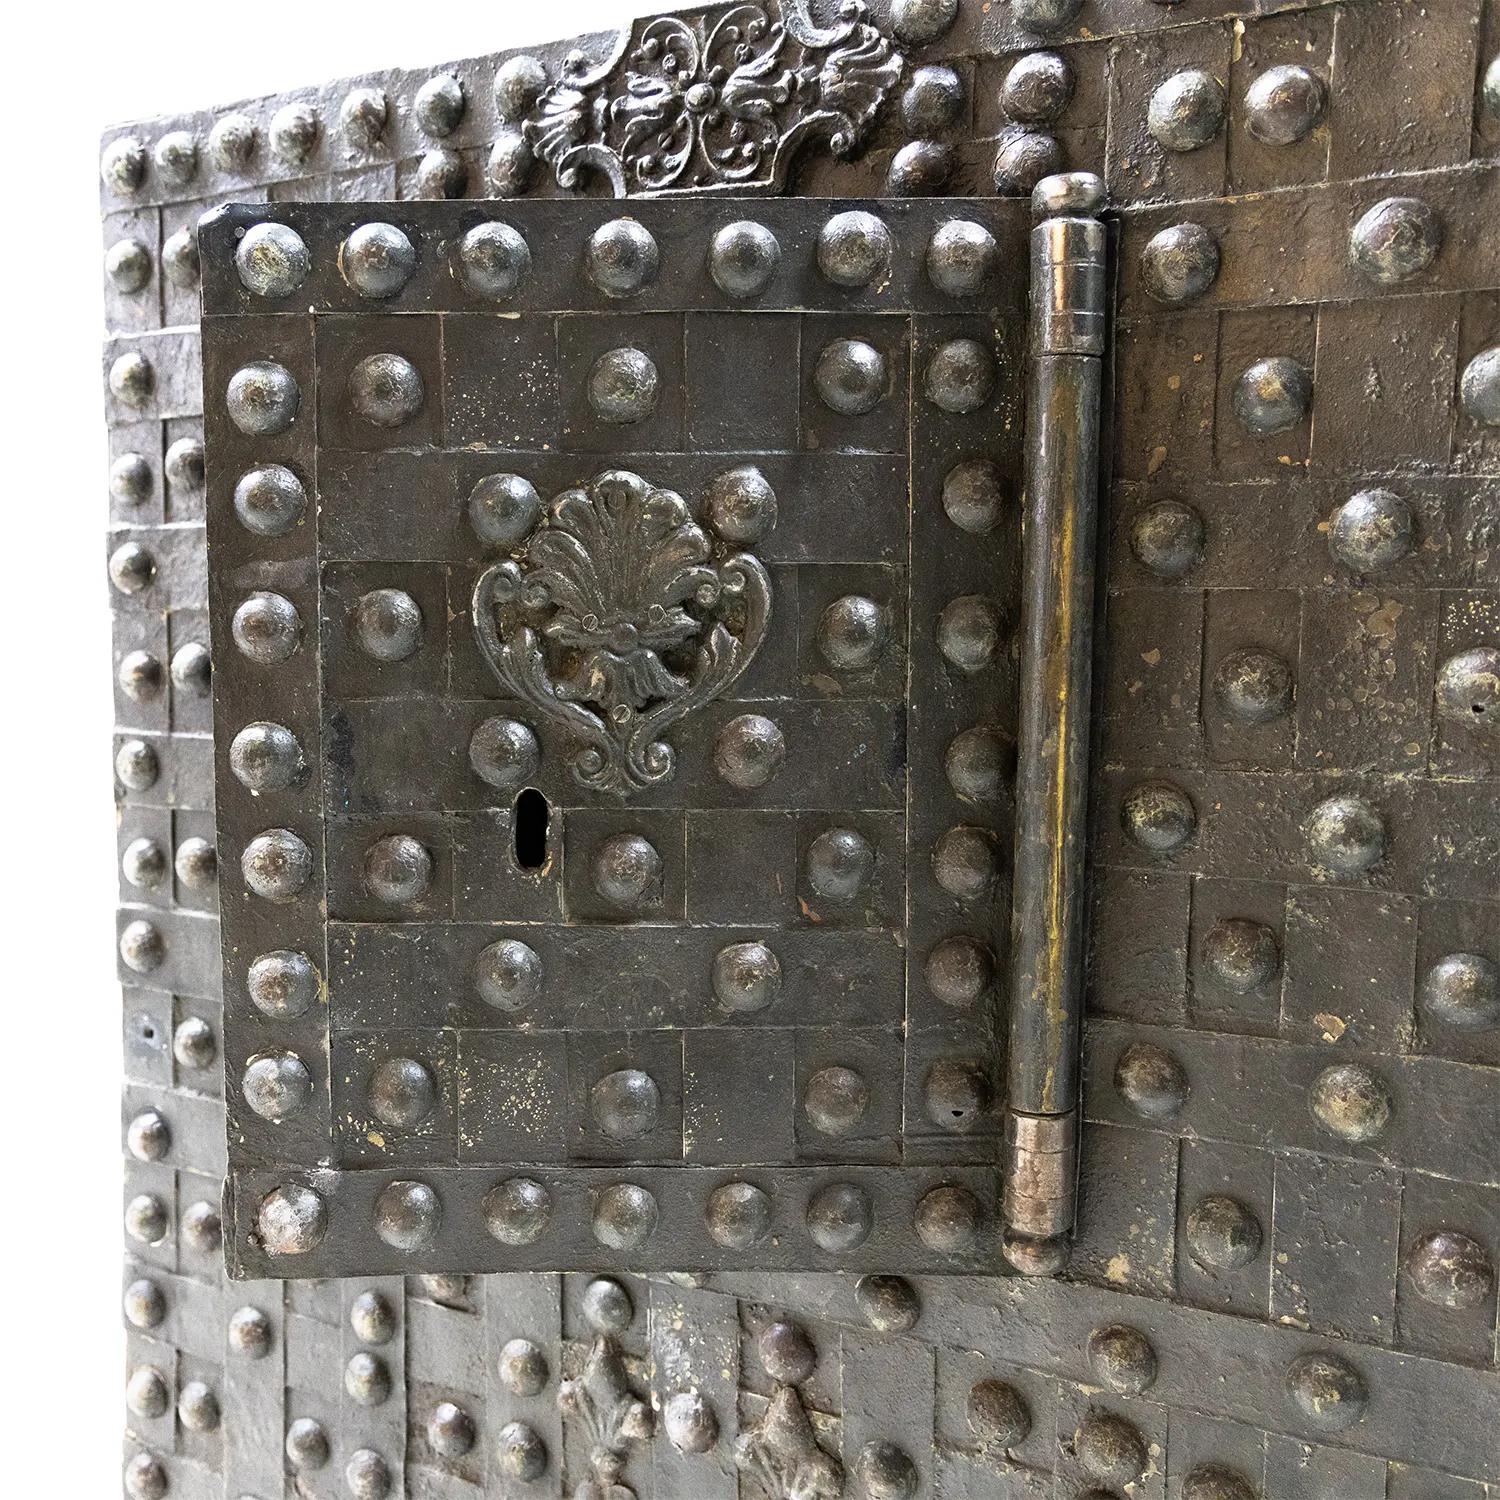 A large, antique single-door safe or cassa forte made of hand crafted iron with rivets and bands on the surface and palmettes and rocaille decorations on the front, in good condition. The decor piece is consisting its original metal hardware and